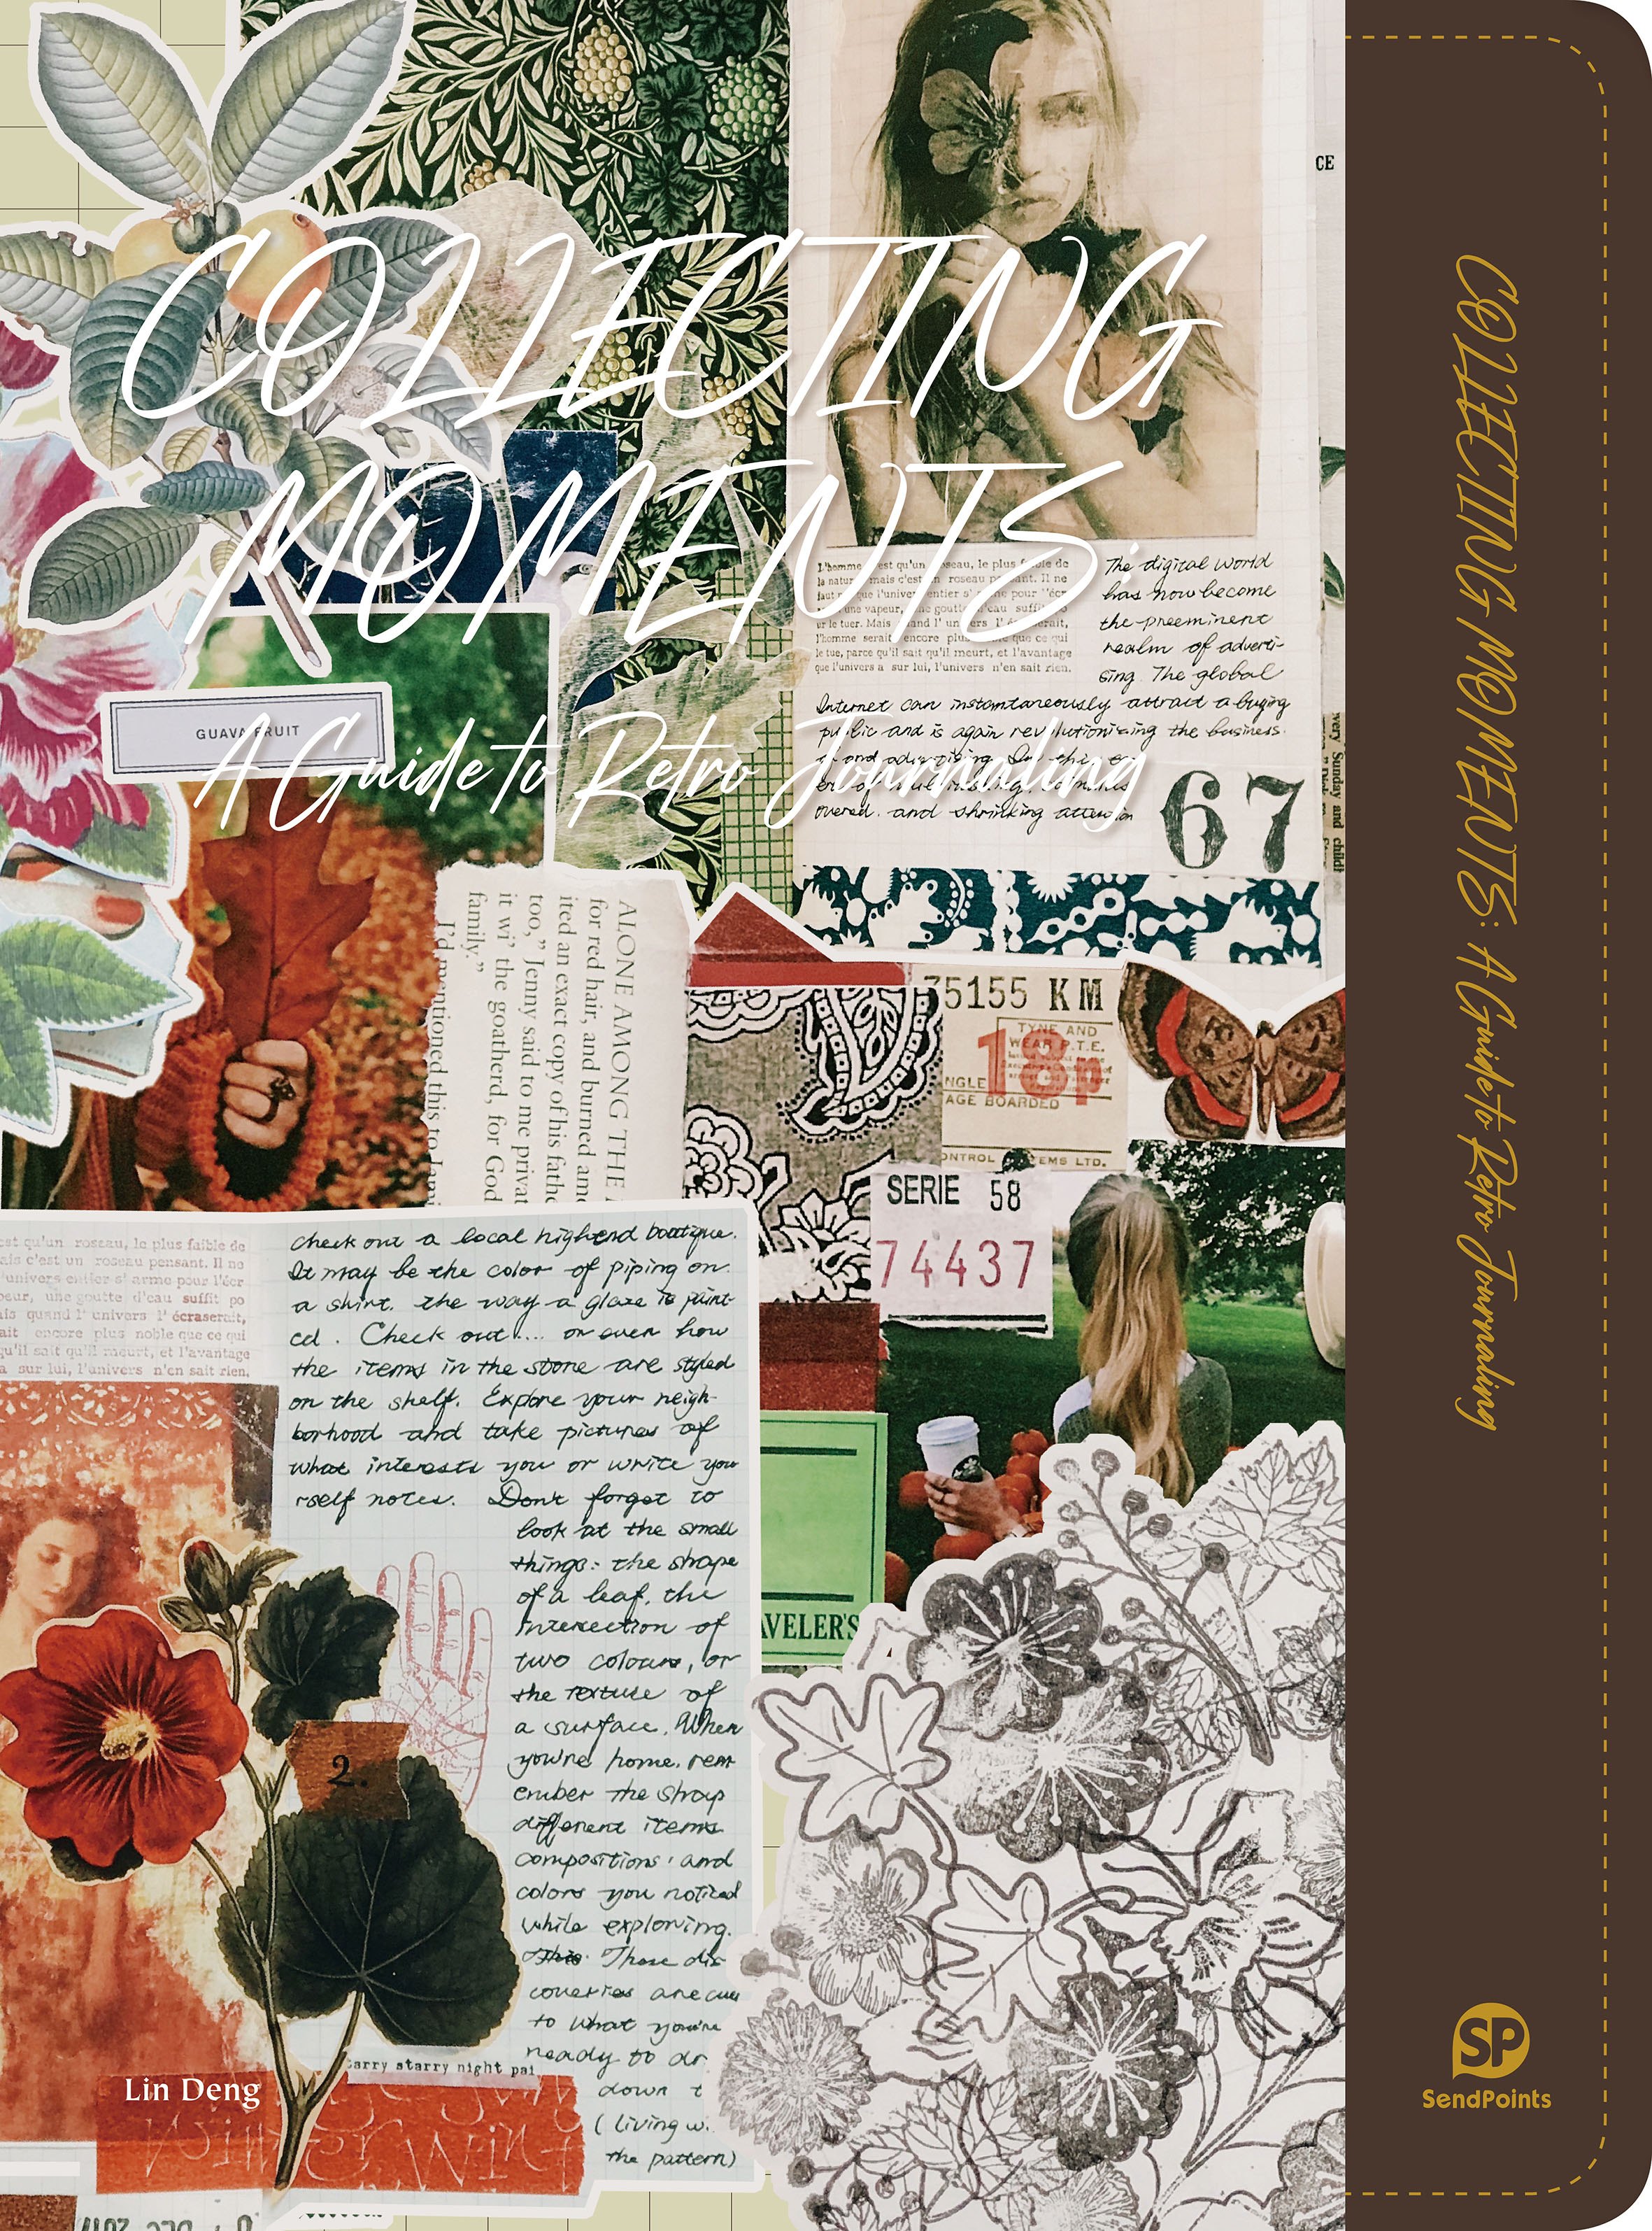 Collecting Moments: A Guide to Retro Journaling